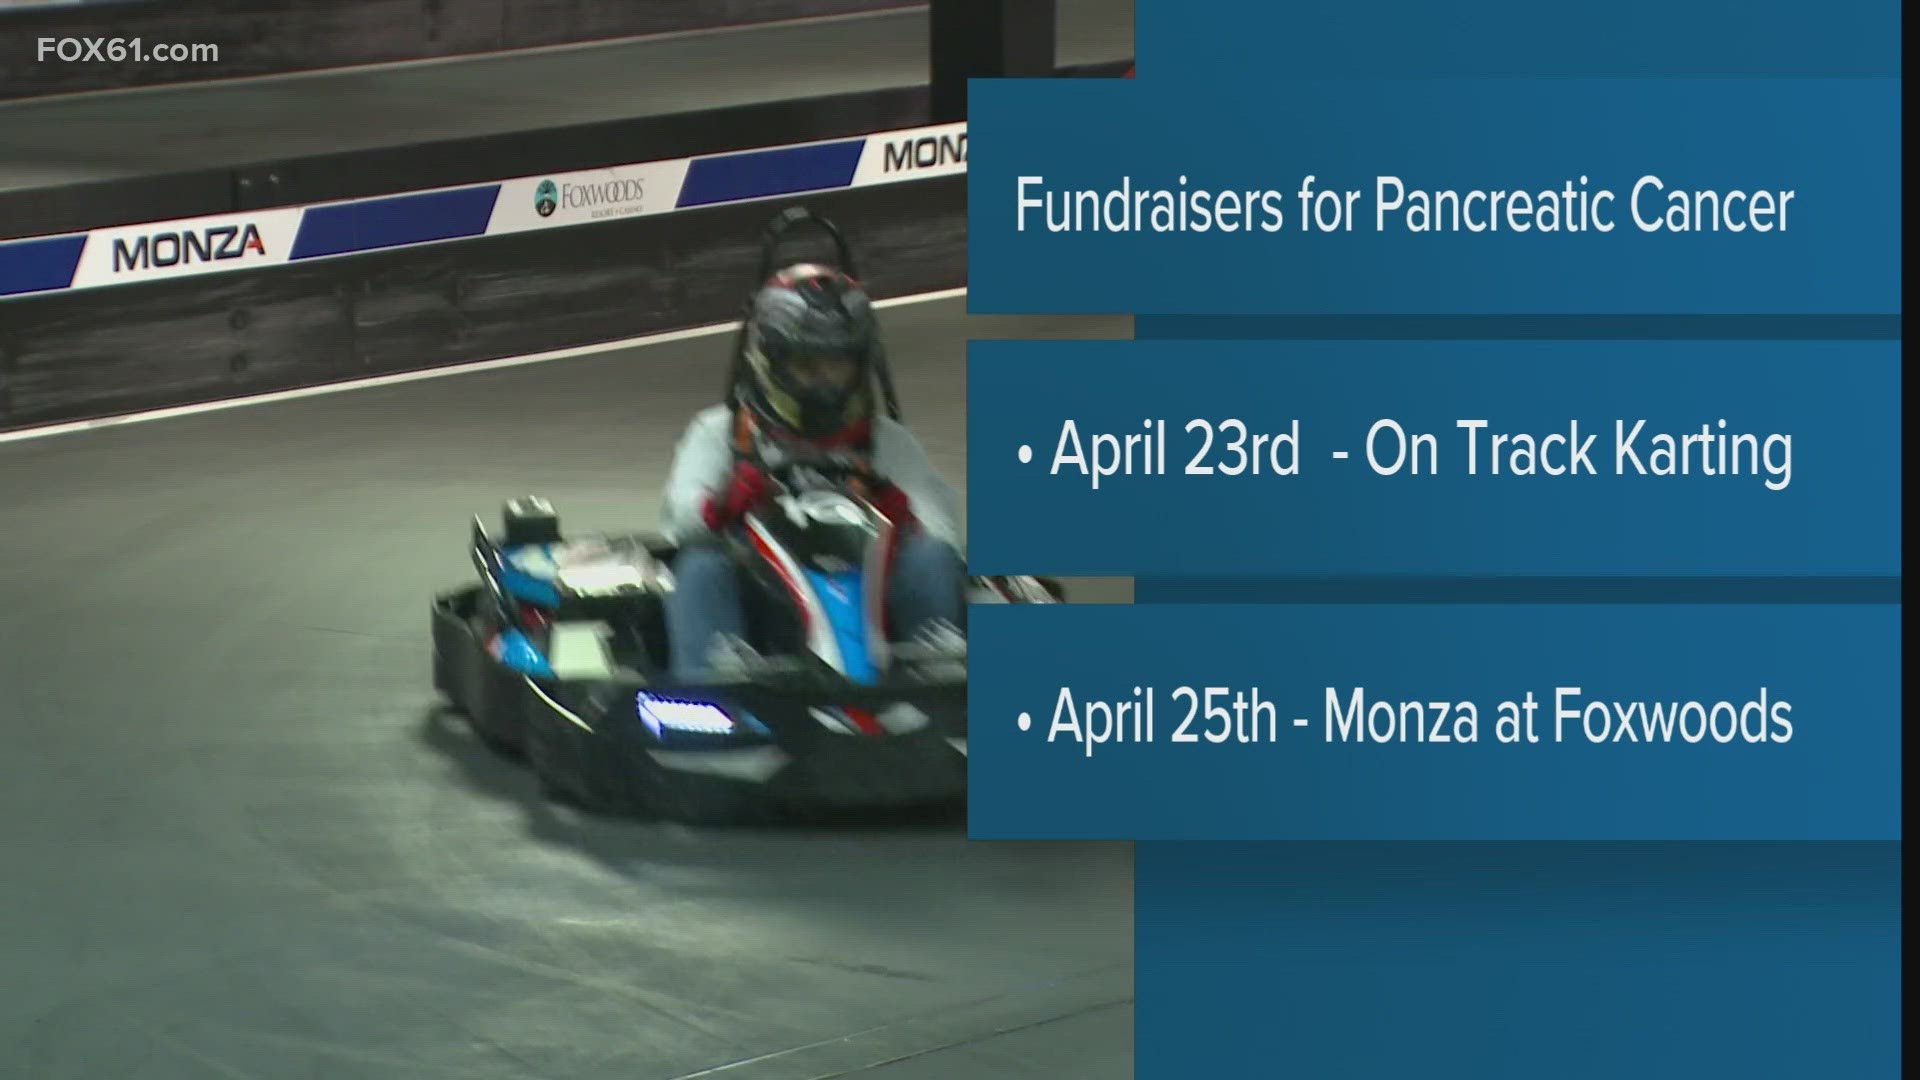 On Track Karting’s upcoming go-karting fundraiser and The Ron Foley Foundation’s ‘Ron’s Run for the Roses’ will both raise money for Pancreatic Cancer Awareness.